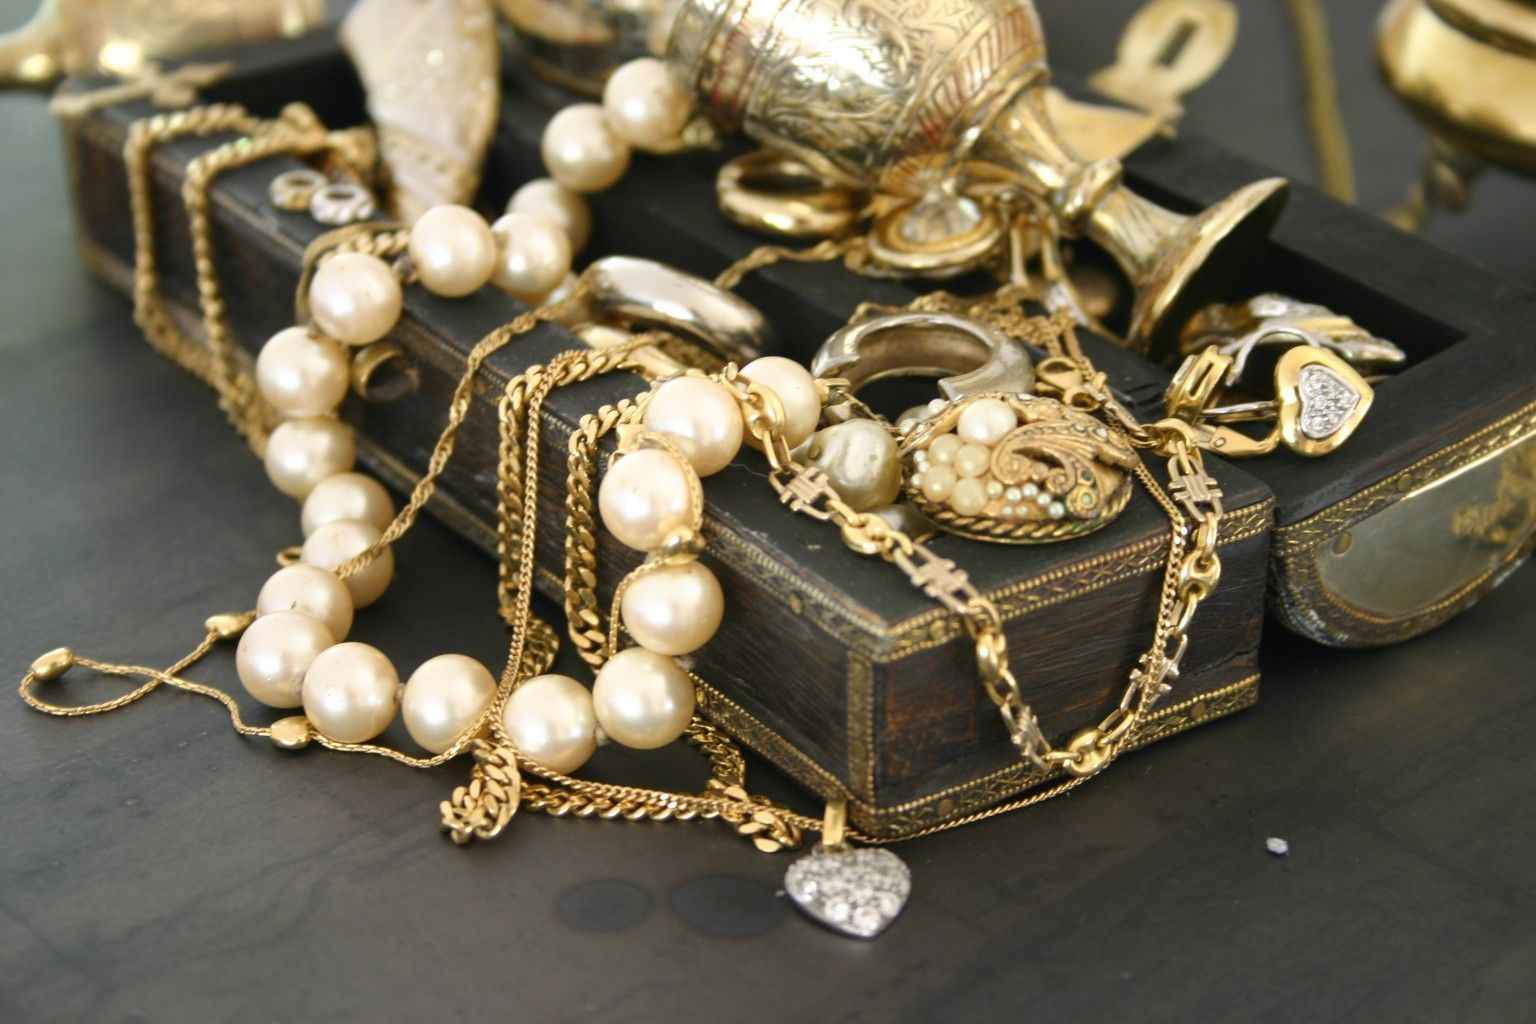 What We Buy at Houston Jewelry Buyers in Houston, TX